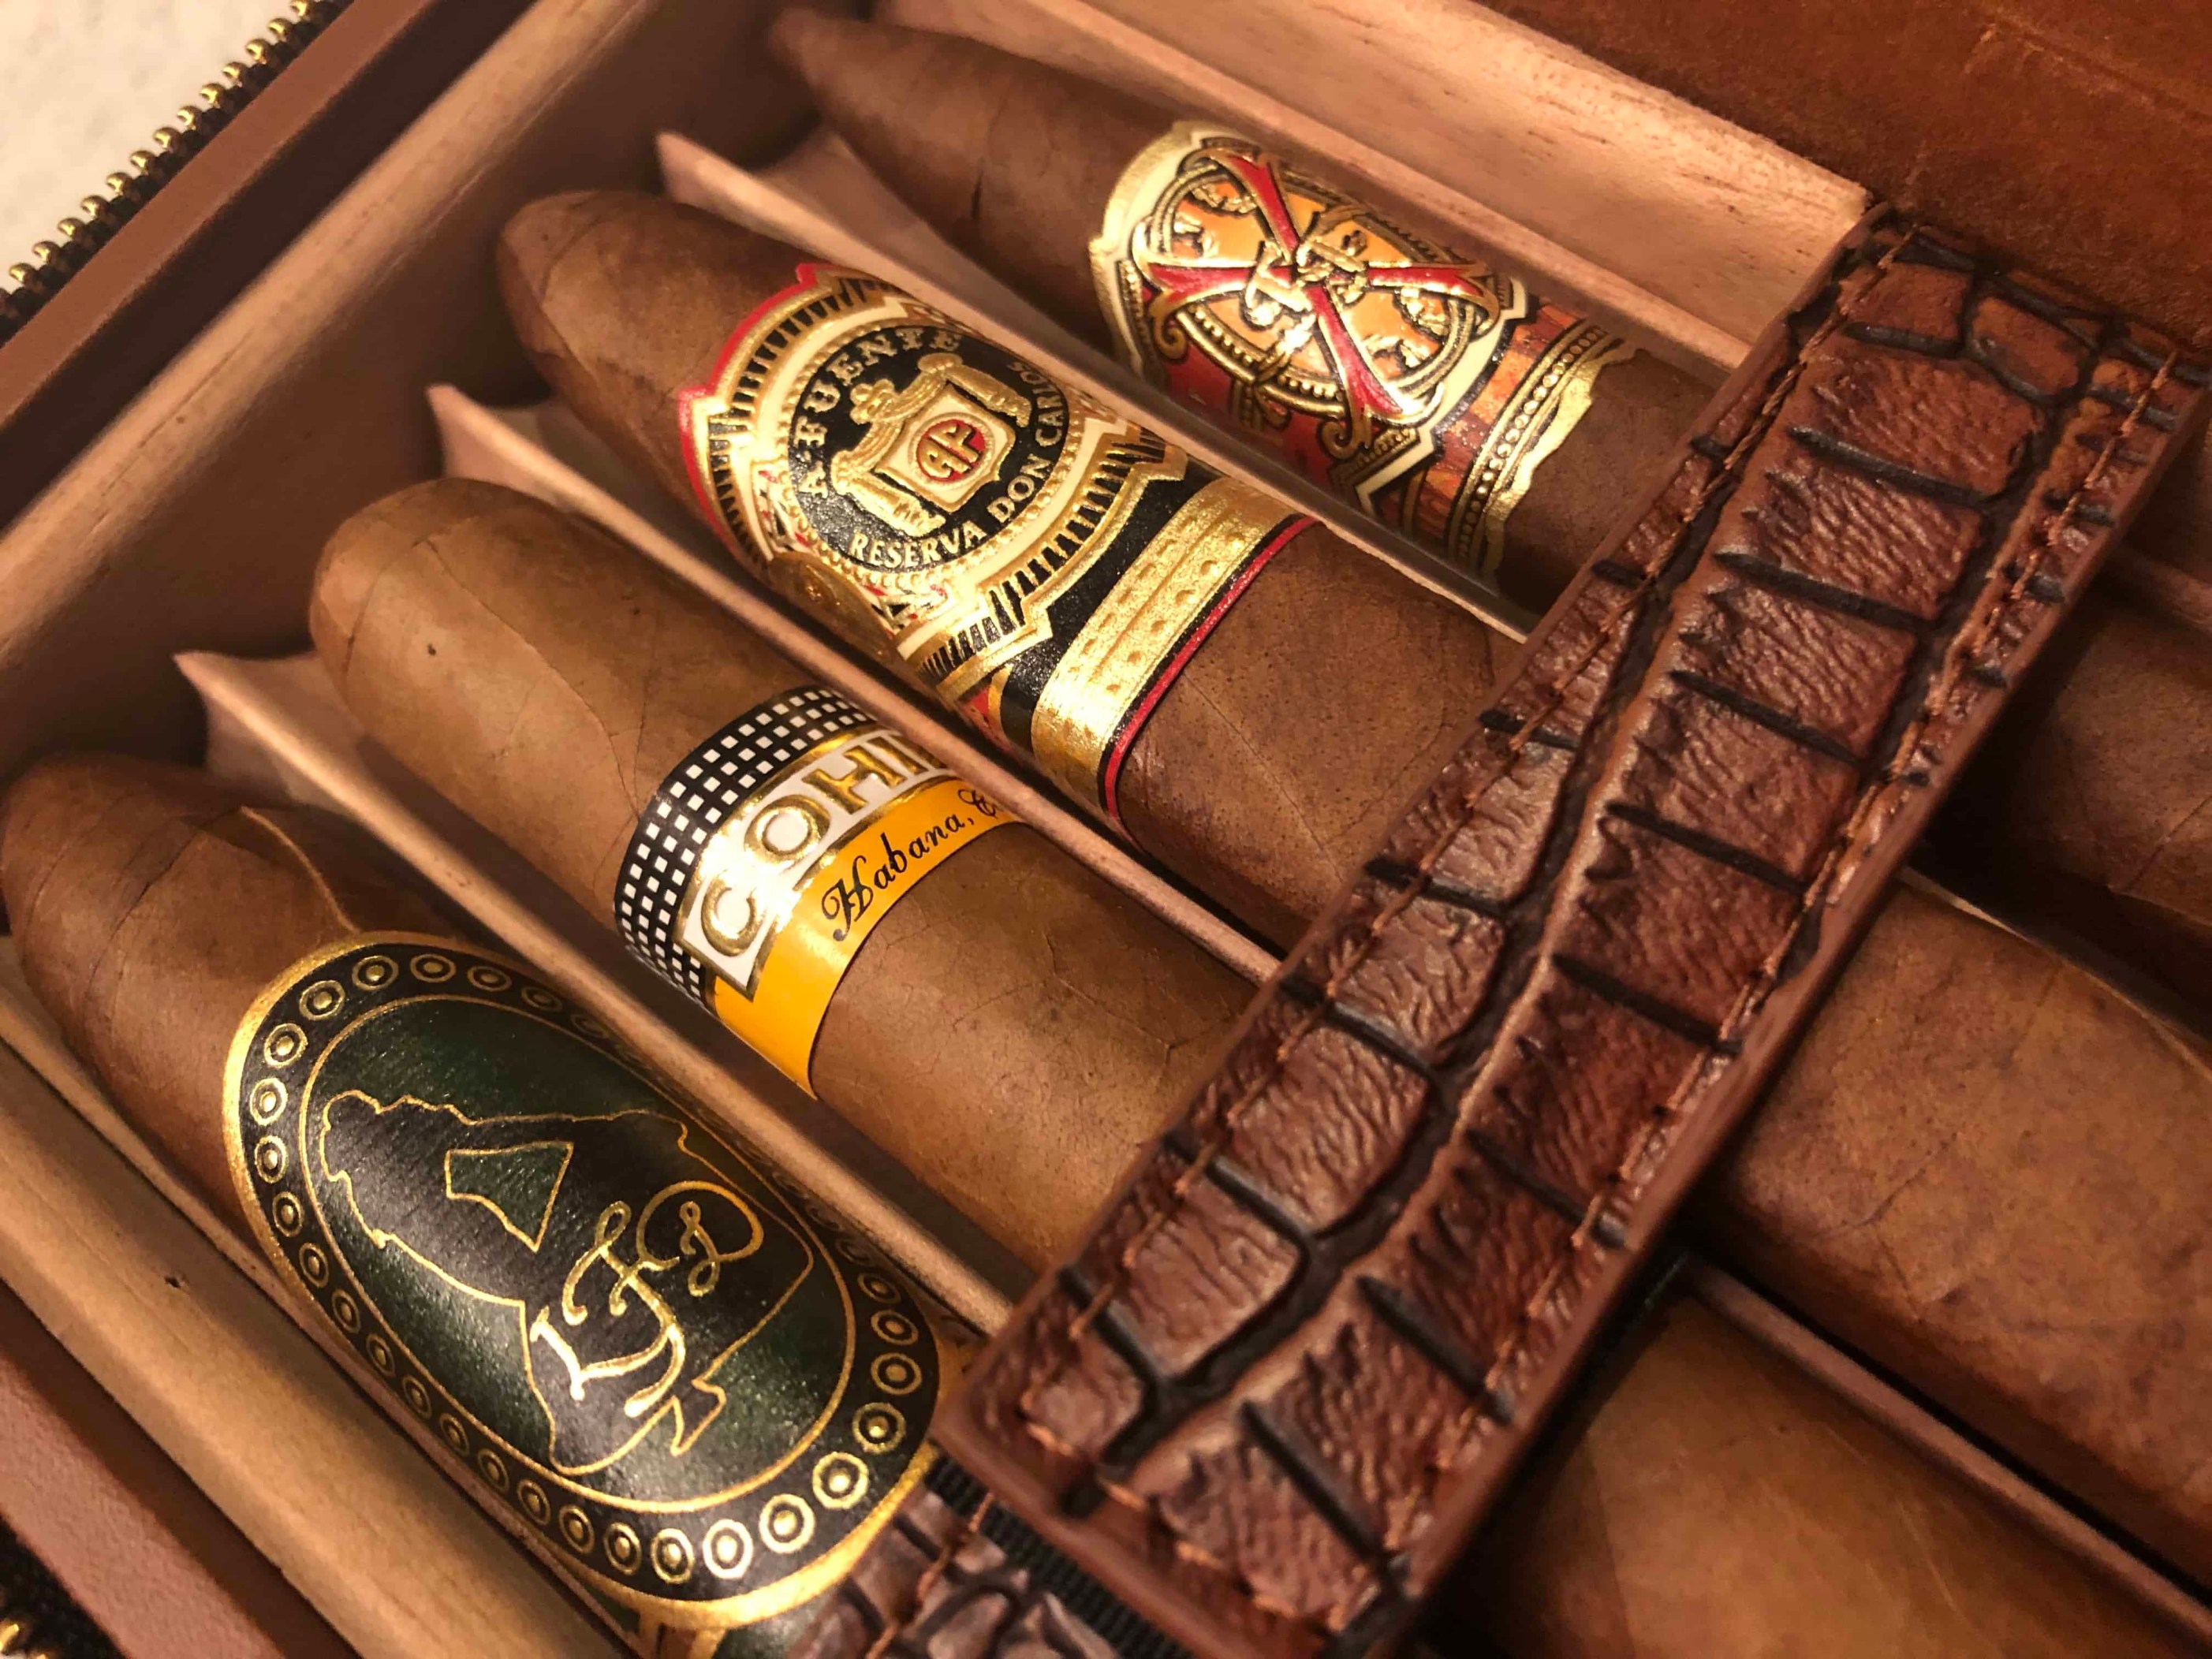 Luxury Cigar Club Reviews Get All The Details At Hello Subscription!